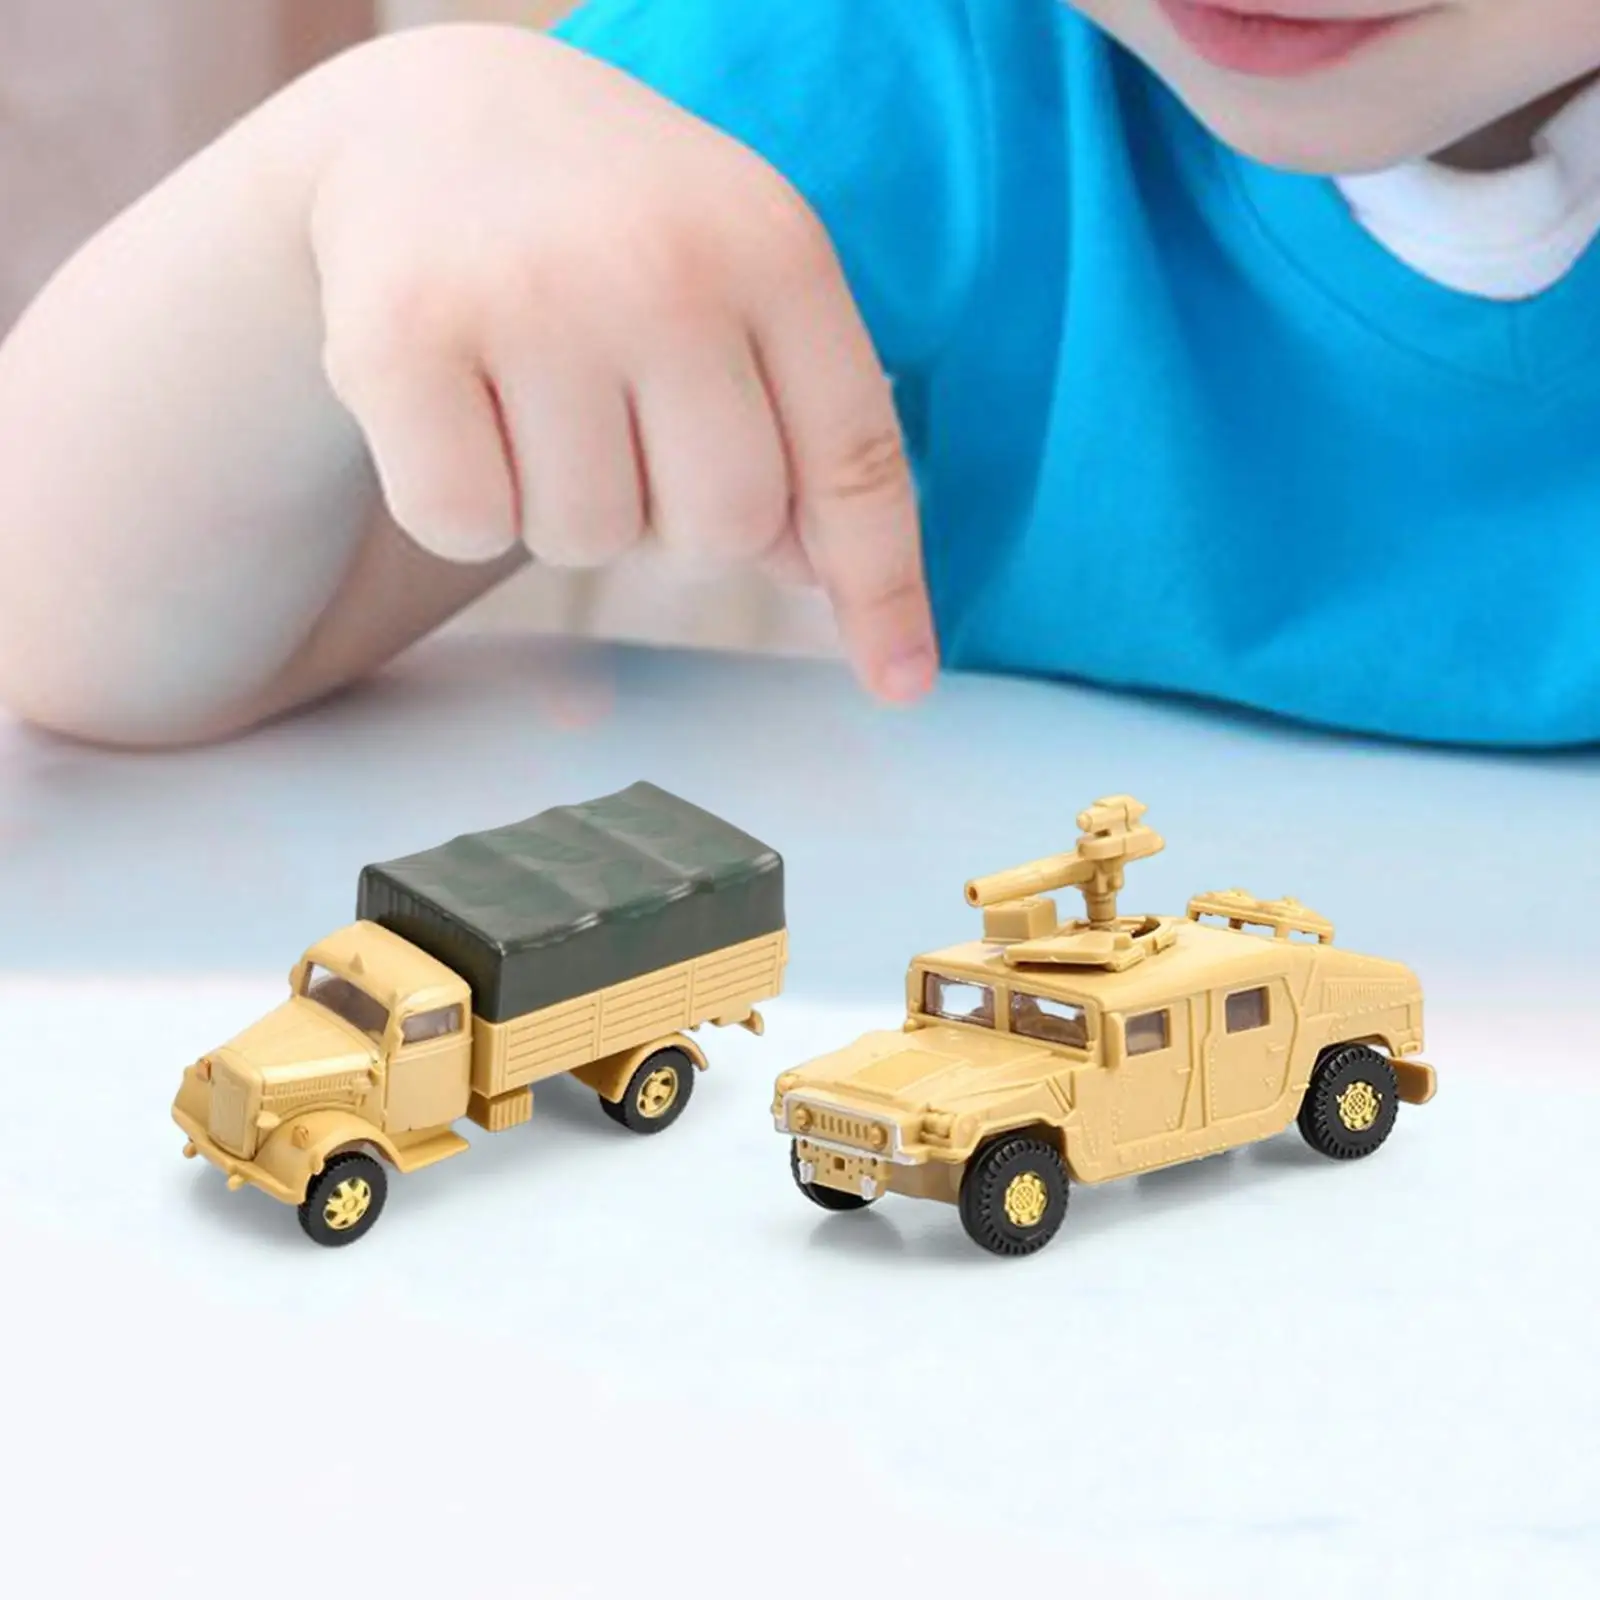 2 Pieces 1:72 Wheeled Armored Vehicle Vehicle Model Toys Decoration for Role Play